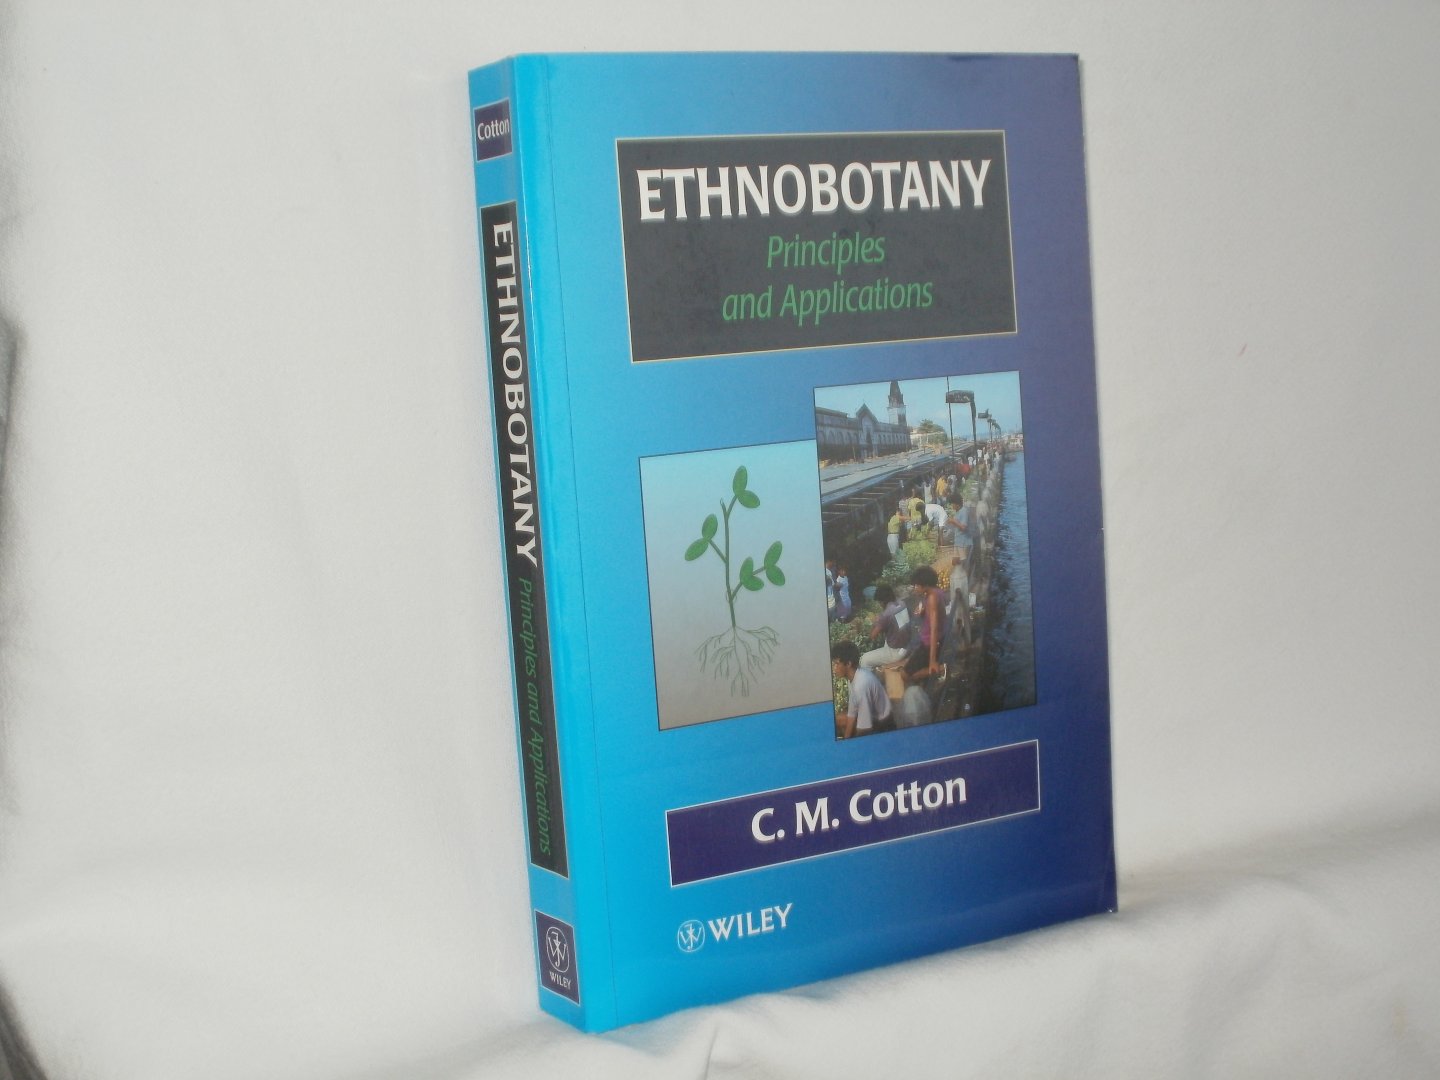 Cotton, C.M. - Ethnobotany. Principles and Applications